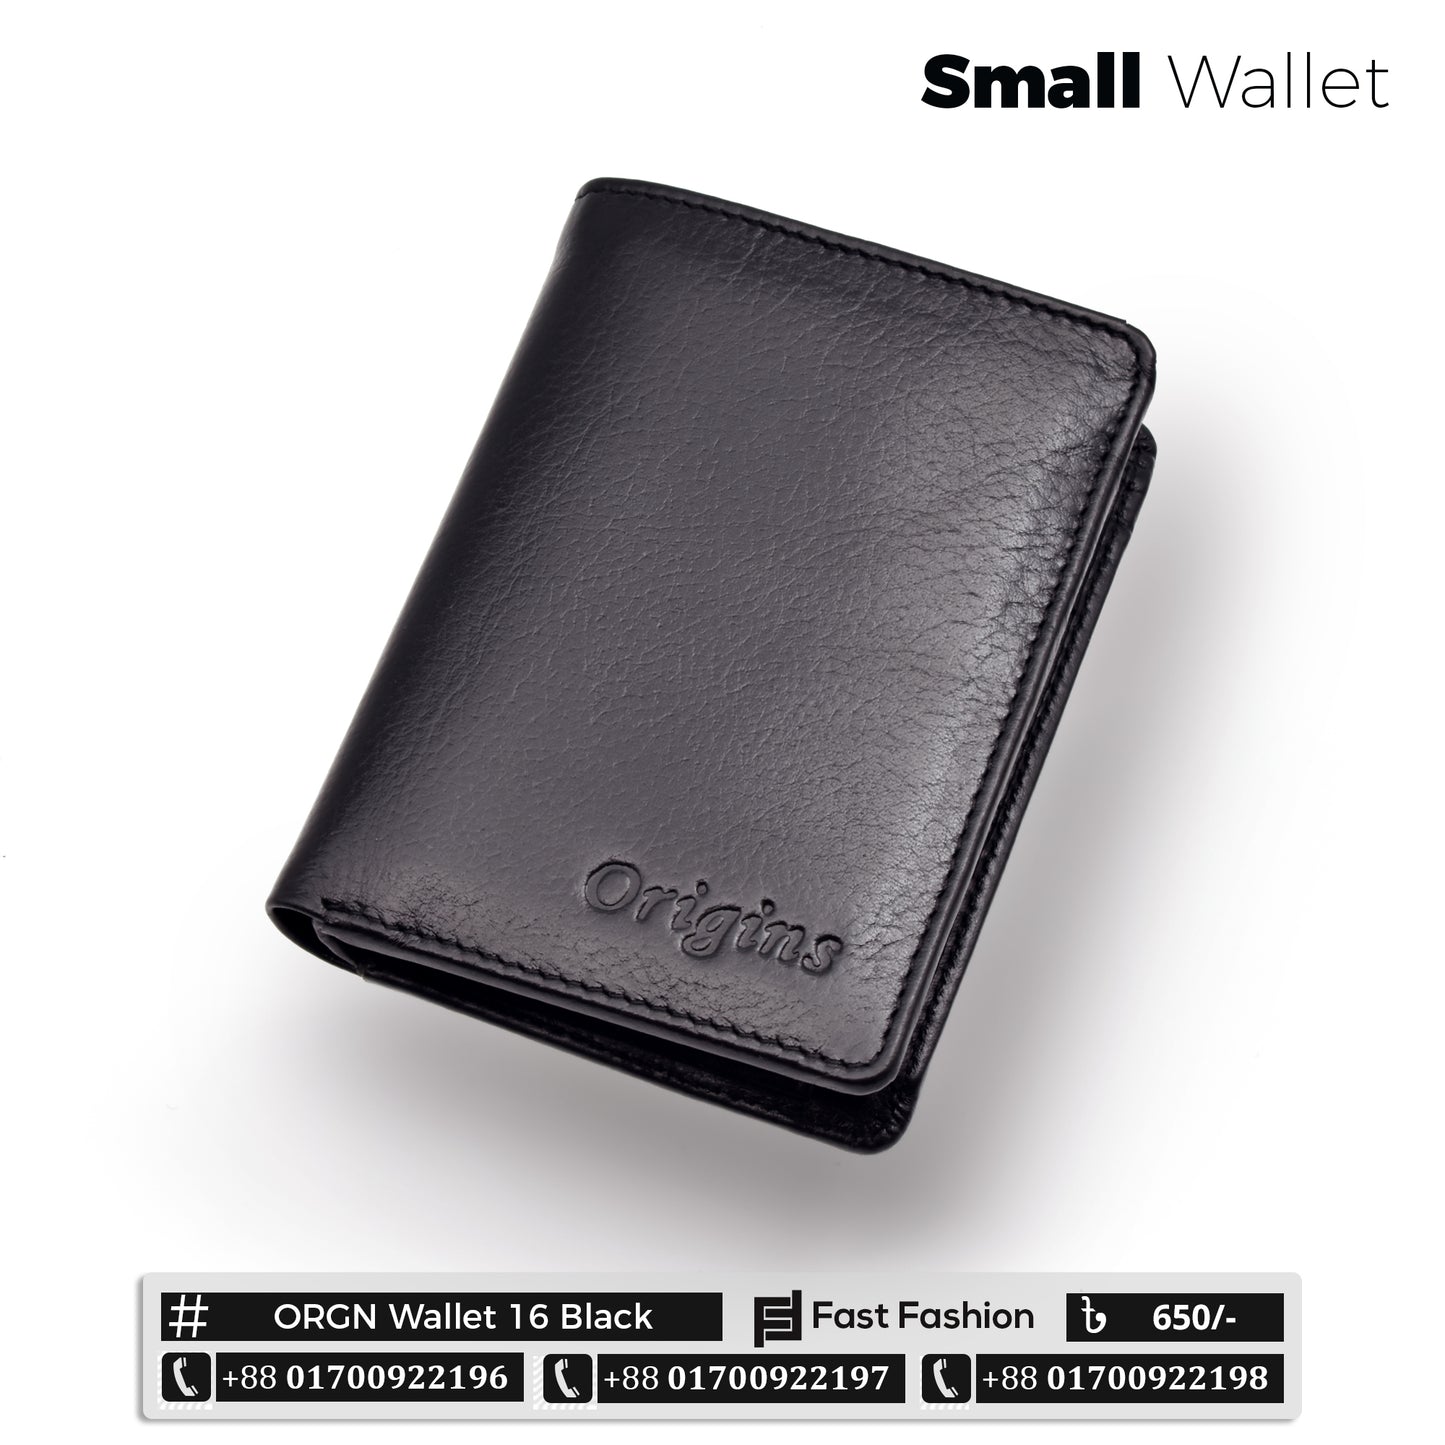 Small Size Premium Quality Leather Wallet | ORGN Wallet 16